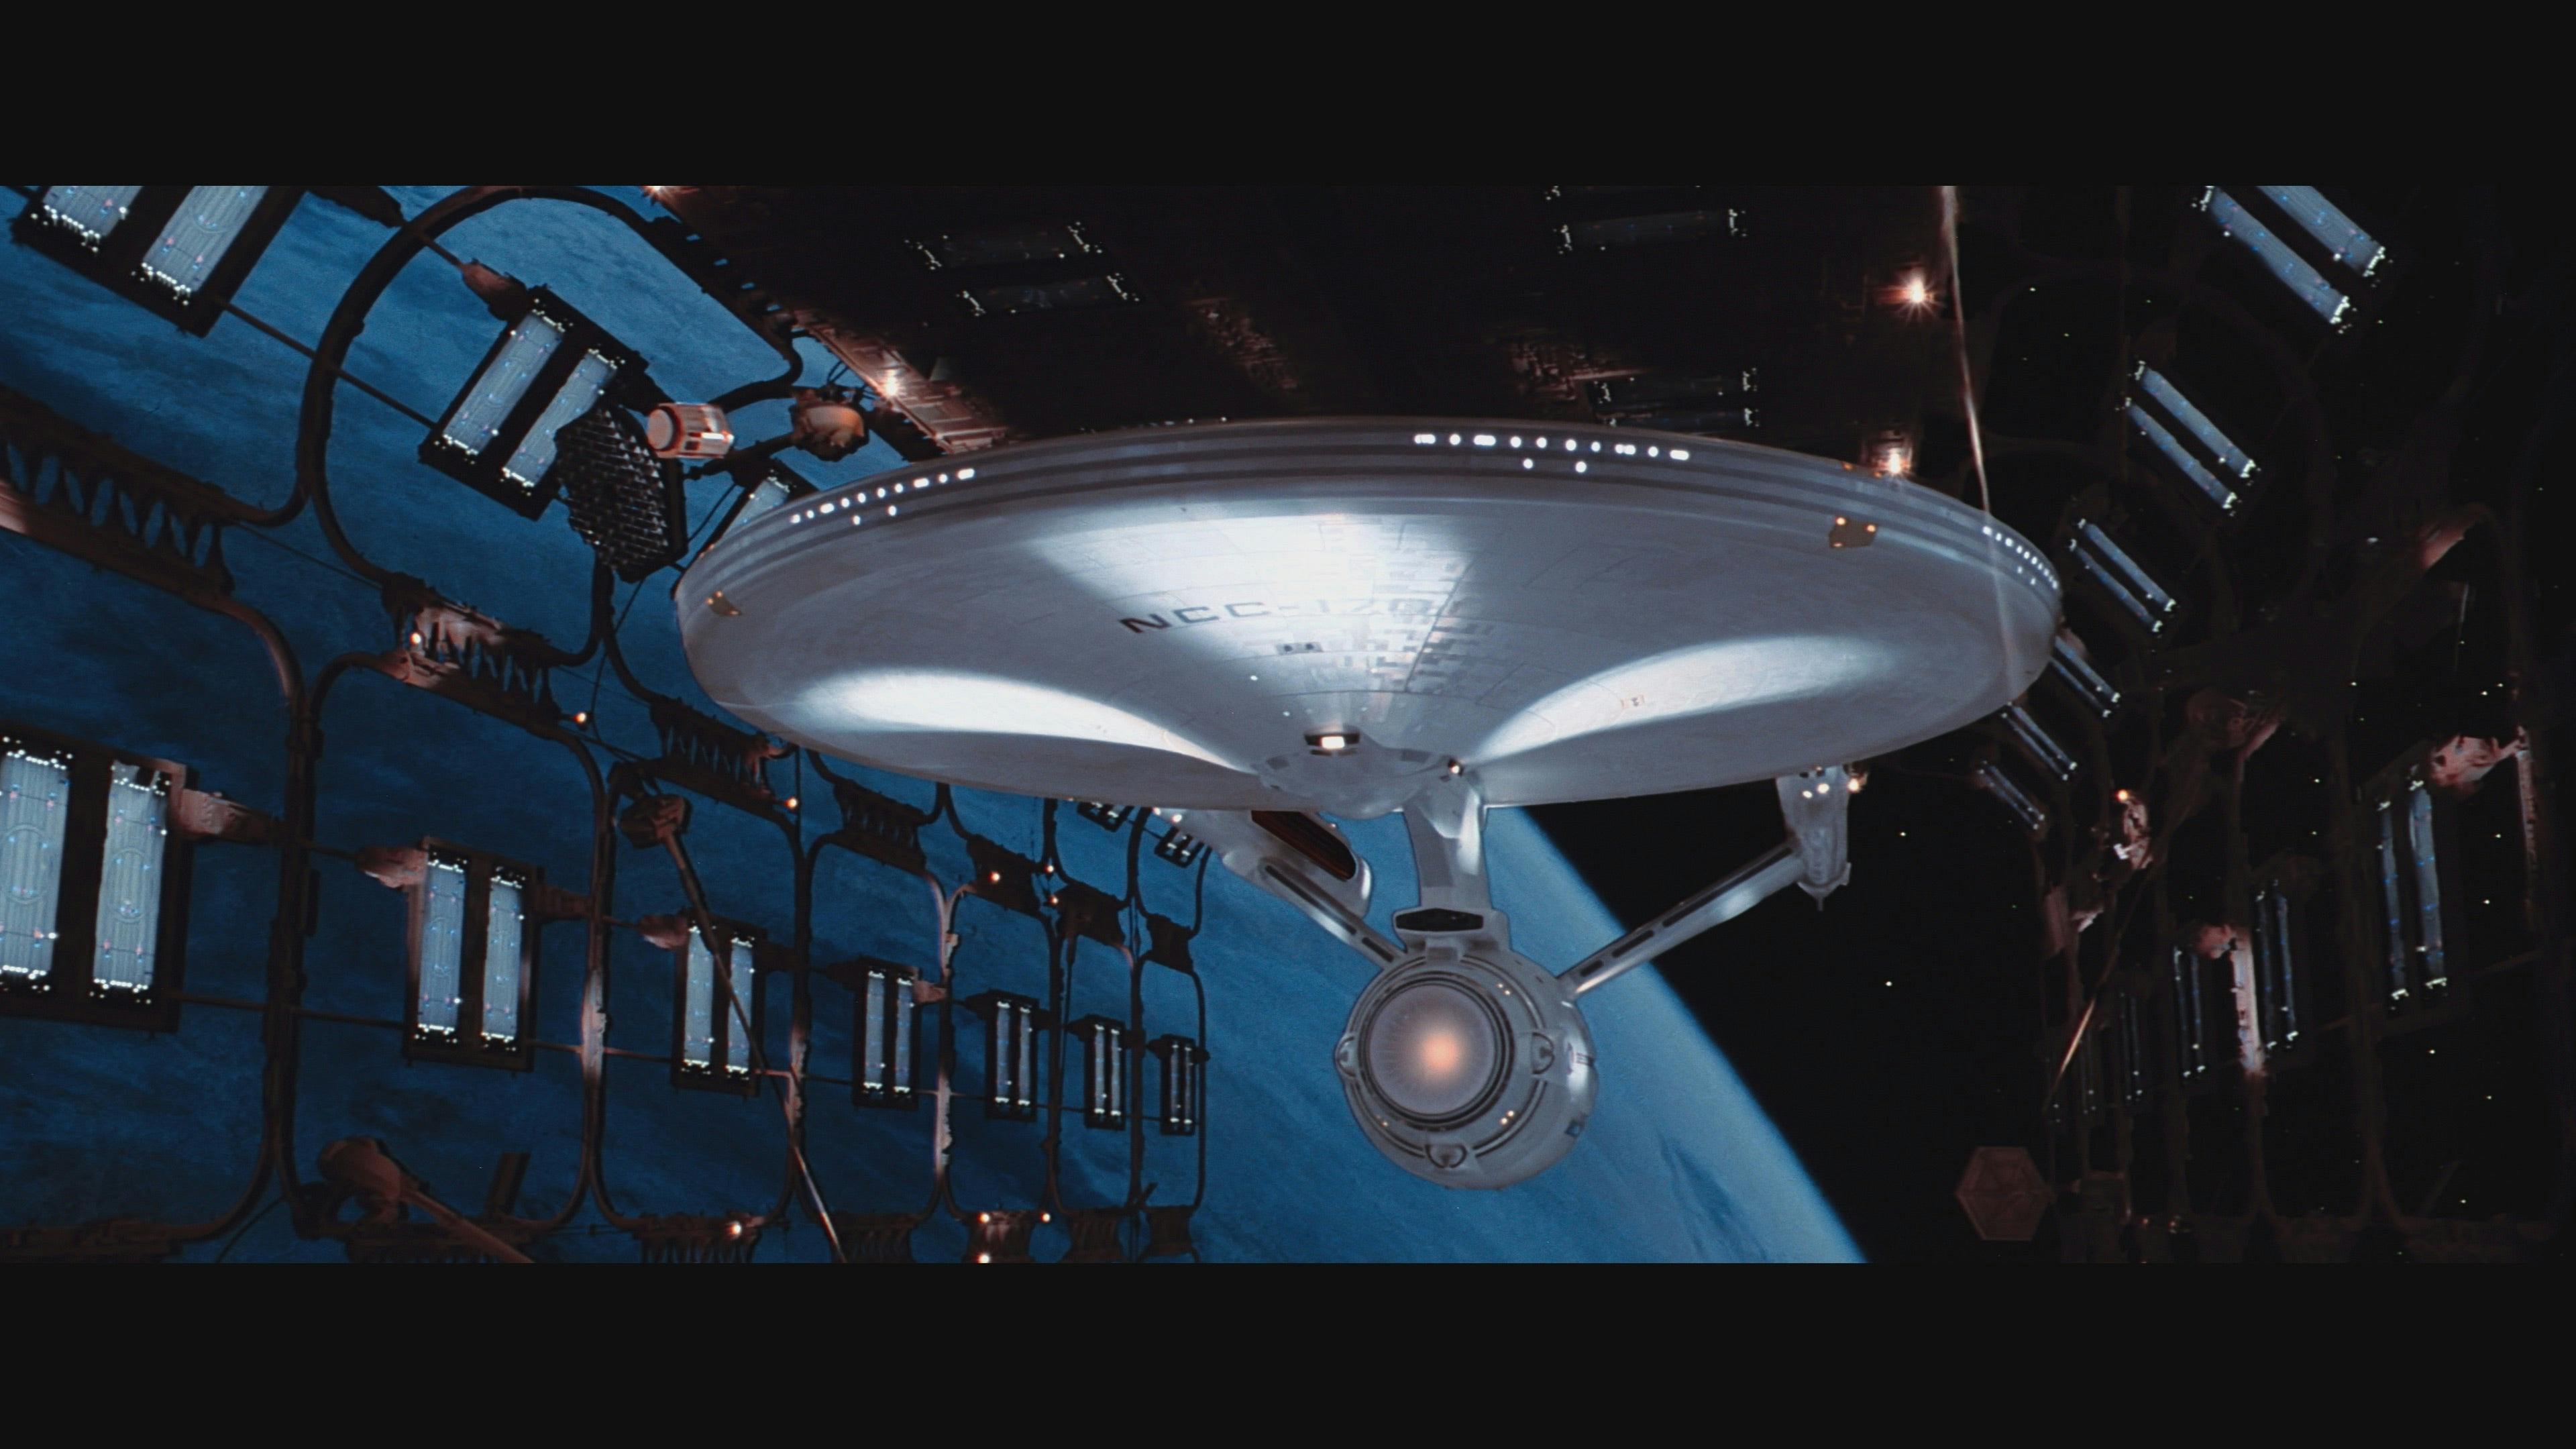 The Enterprise prepares to leave space dock in Star Trek: The Motion Picture.